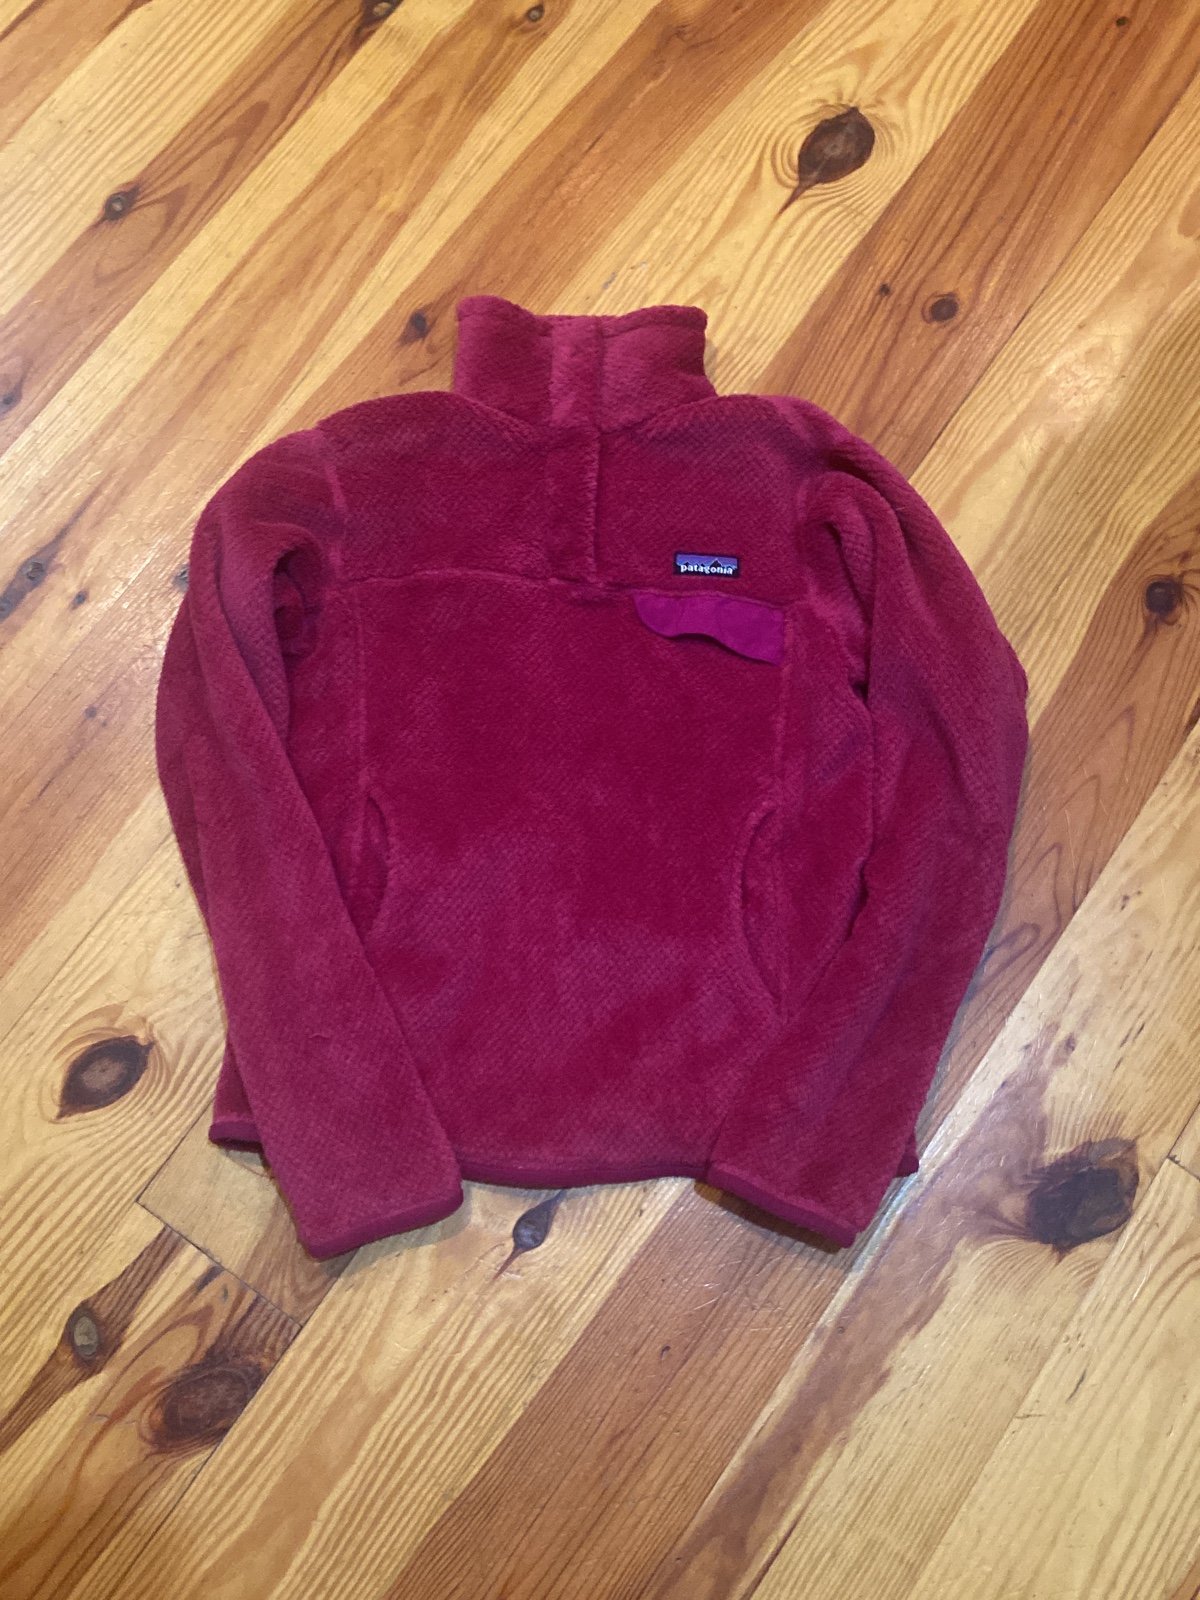 Wholesale price Patagonia fleece size small  excellent 